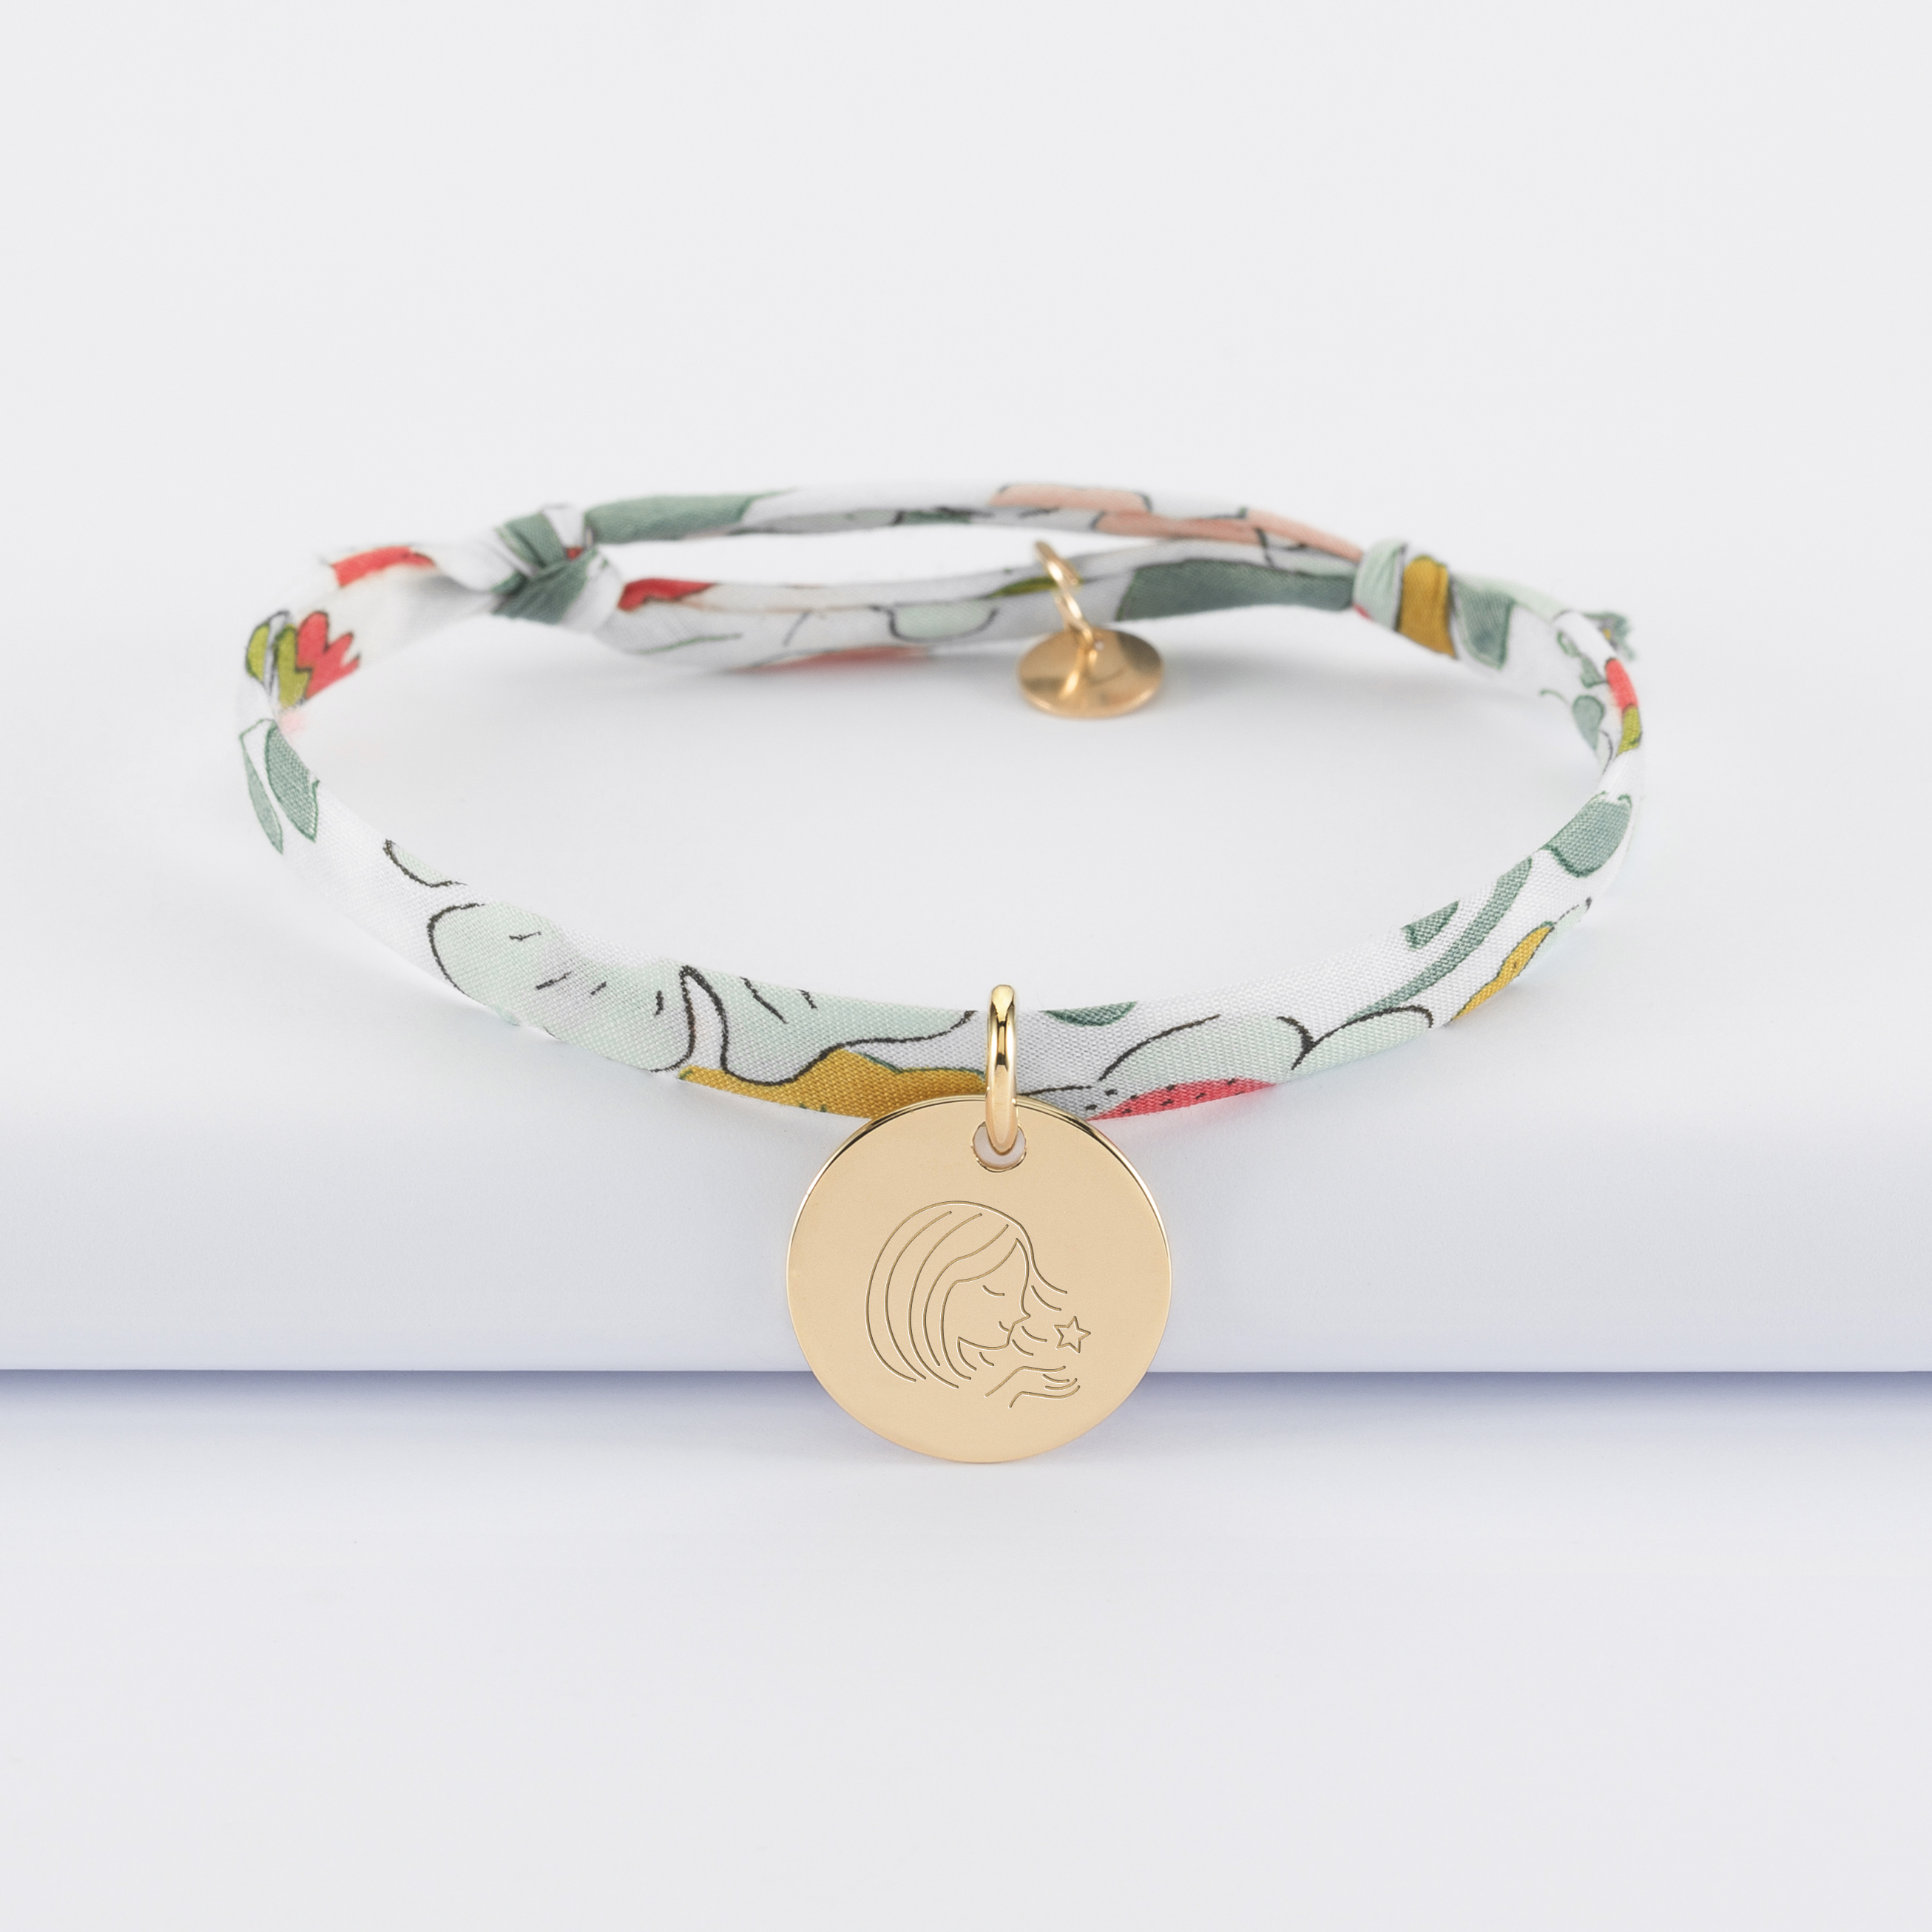 Liberty children's christening bracelet with personalised engraved gold plated medallion 15 mm